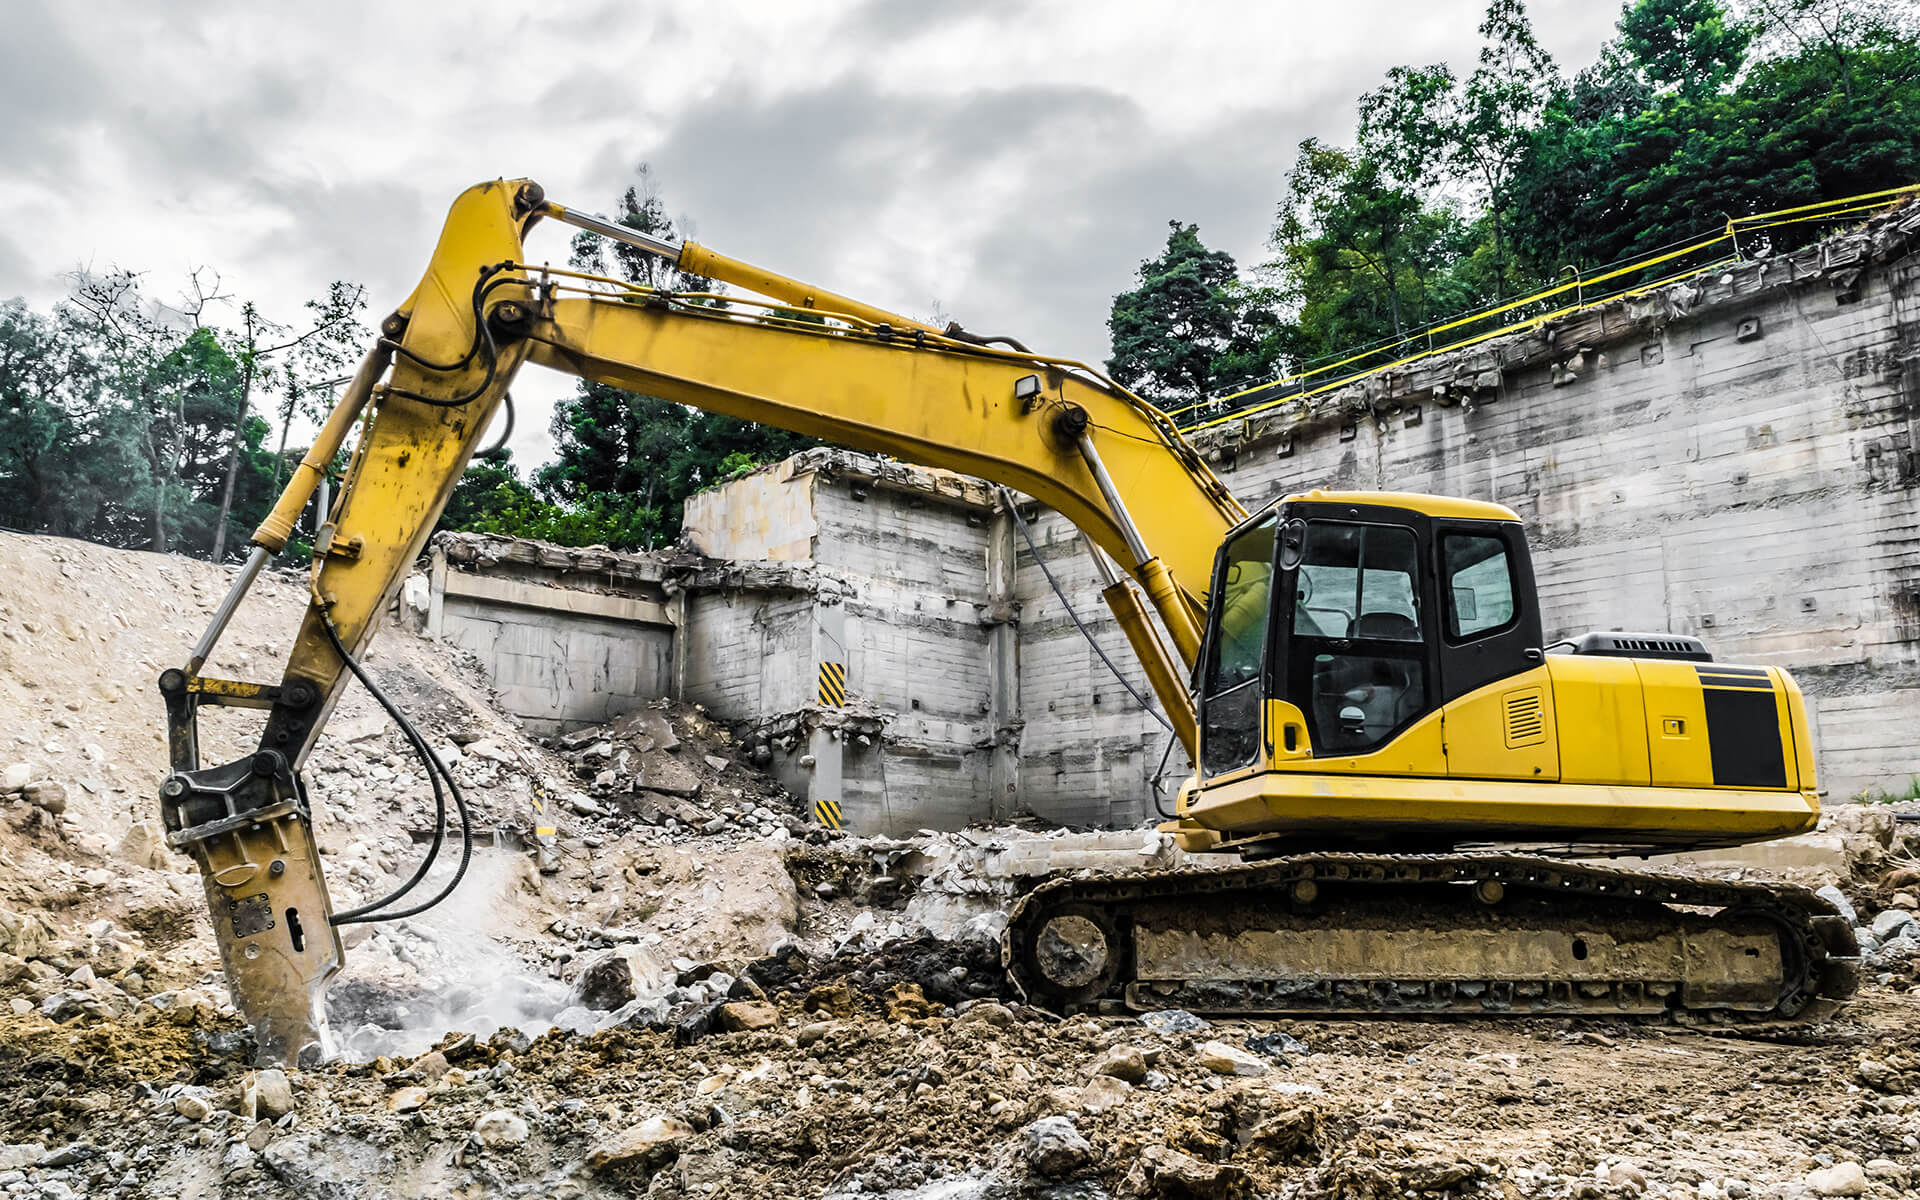 Hammers — Excavator With Hammer in Bedford, NH